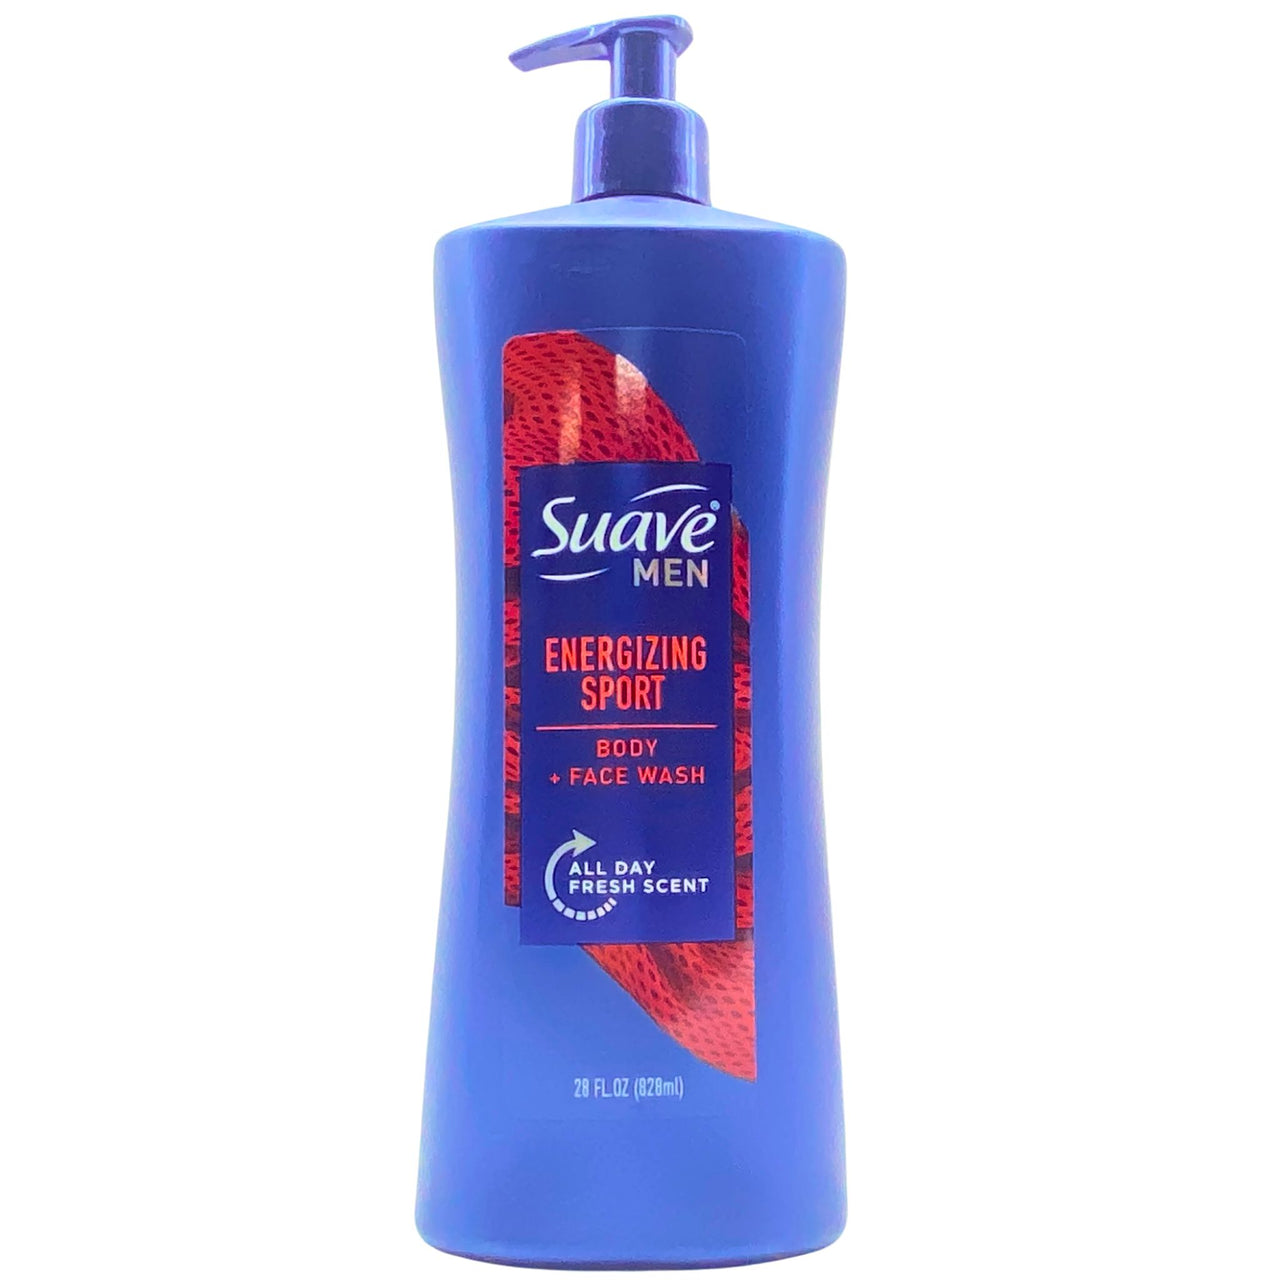 Suave Men Energizing Sport Body + Face Wash All Day Fresh Scent 